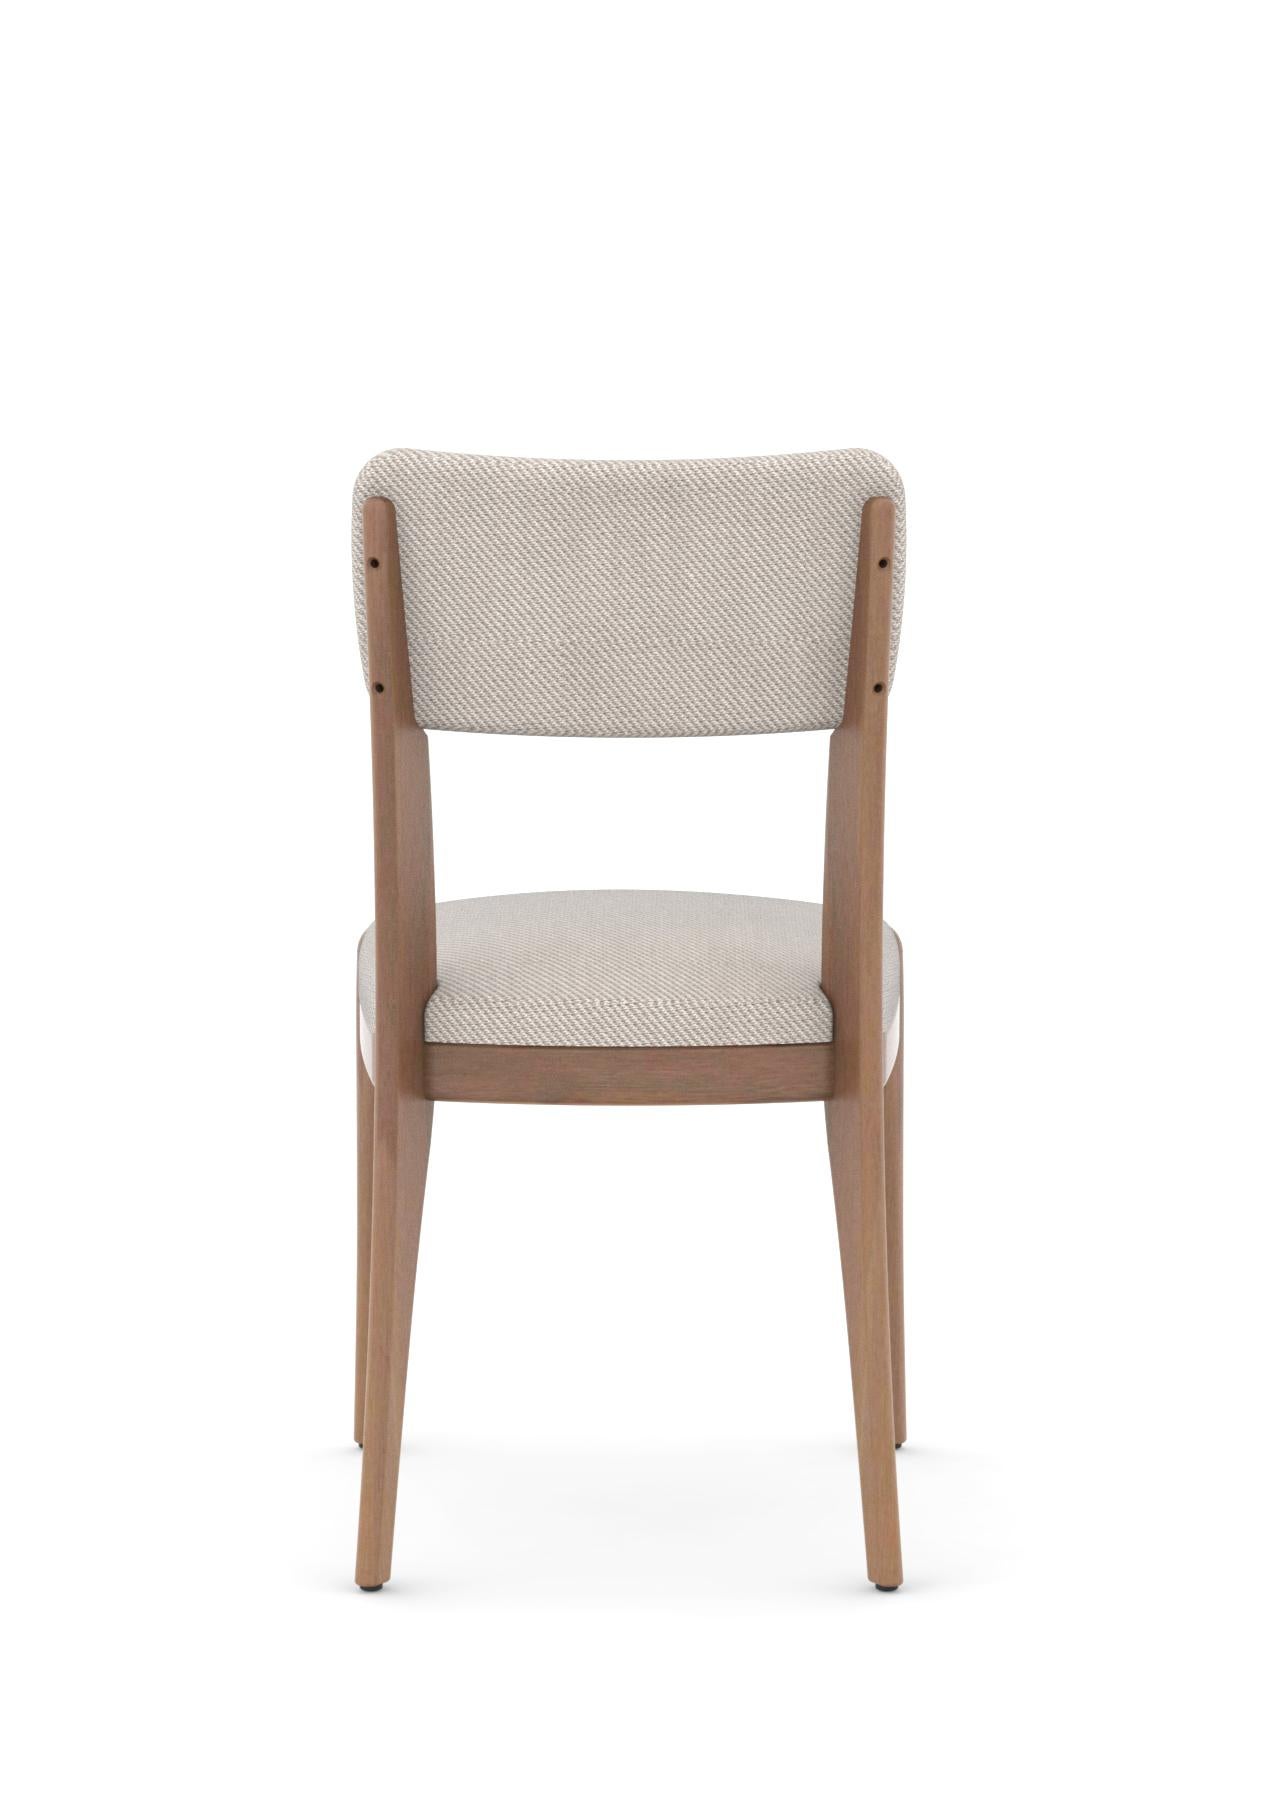 Hand-Crafted Revised Finchdean – solid walnut dining chair